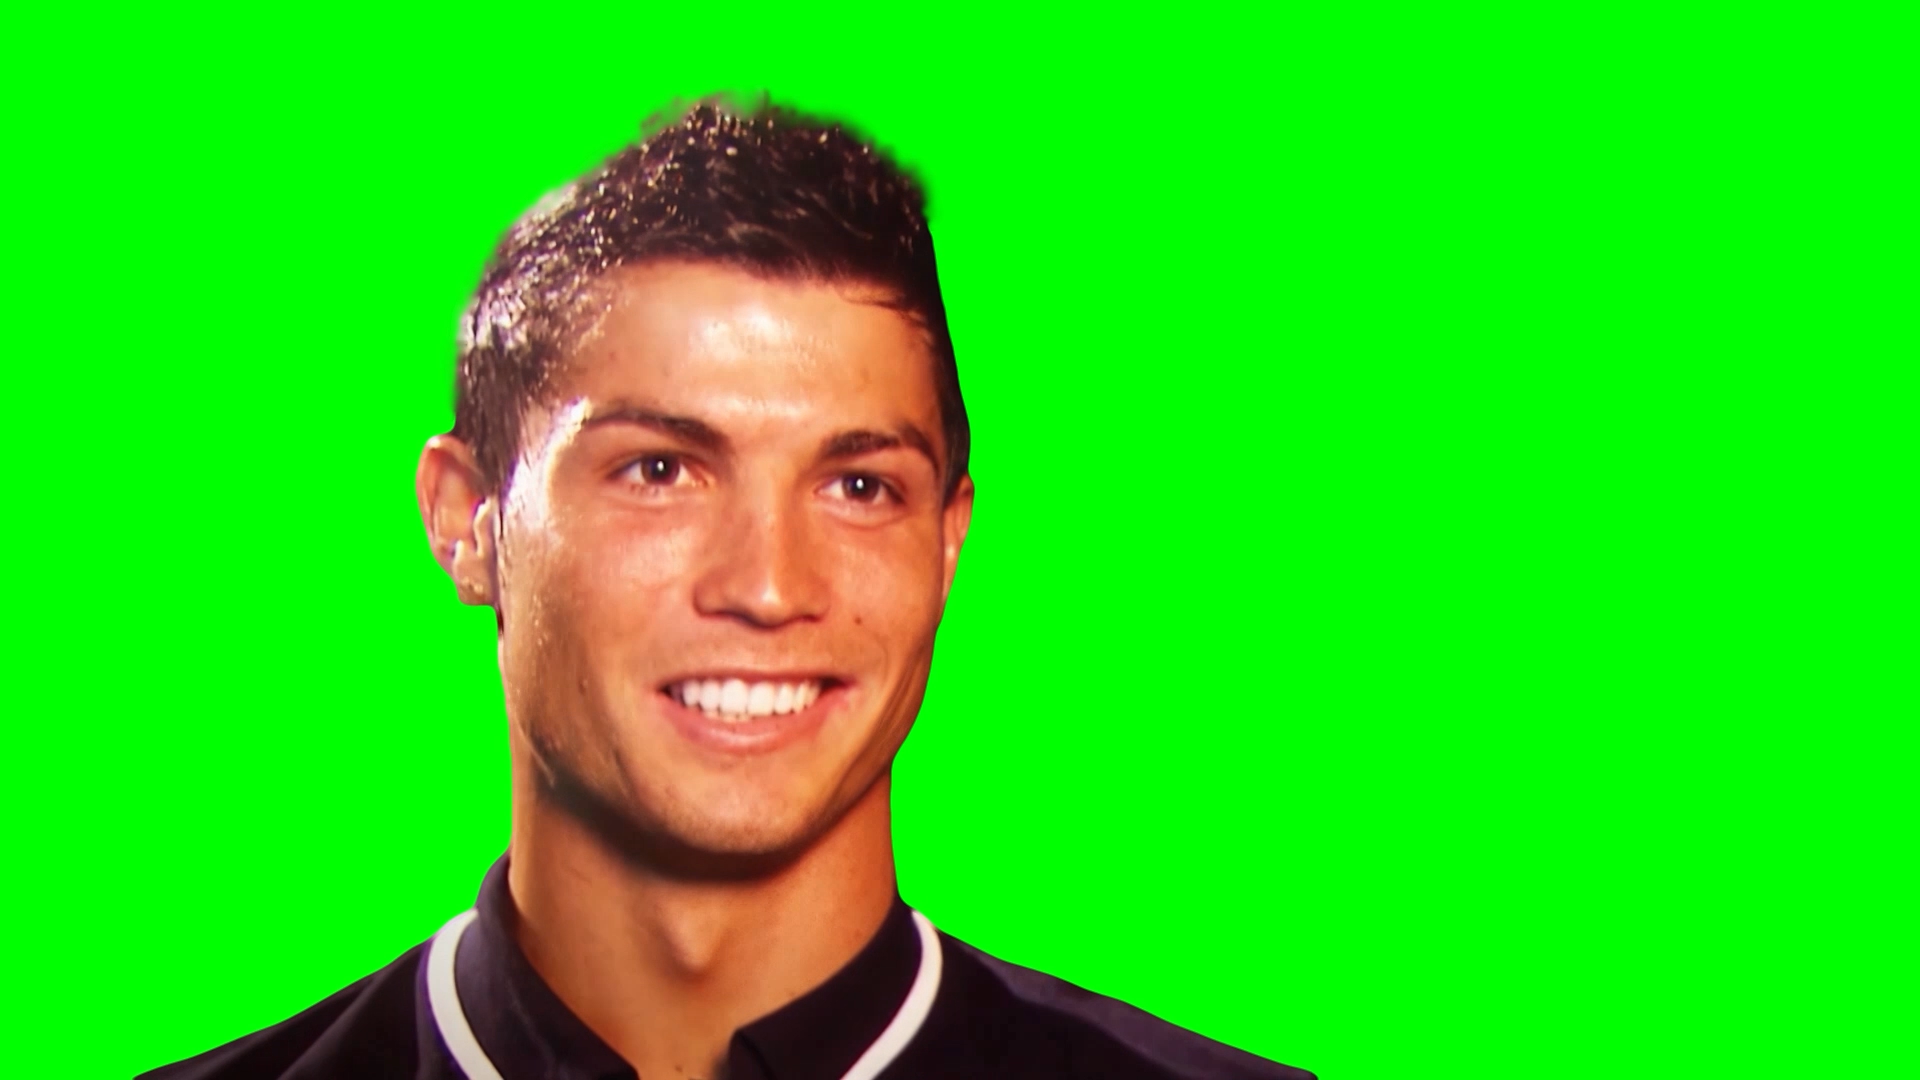 Cristiano Ronaldo - All the time, these stupid questions! (Green Screen)